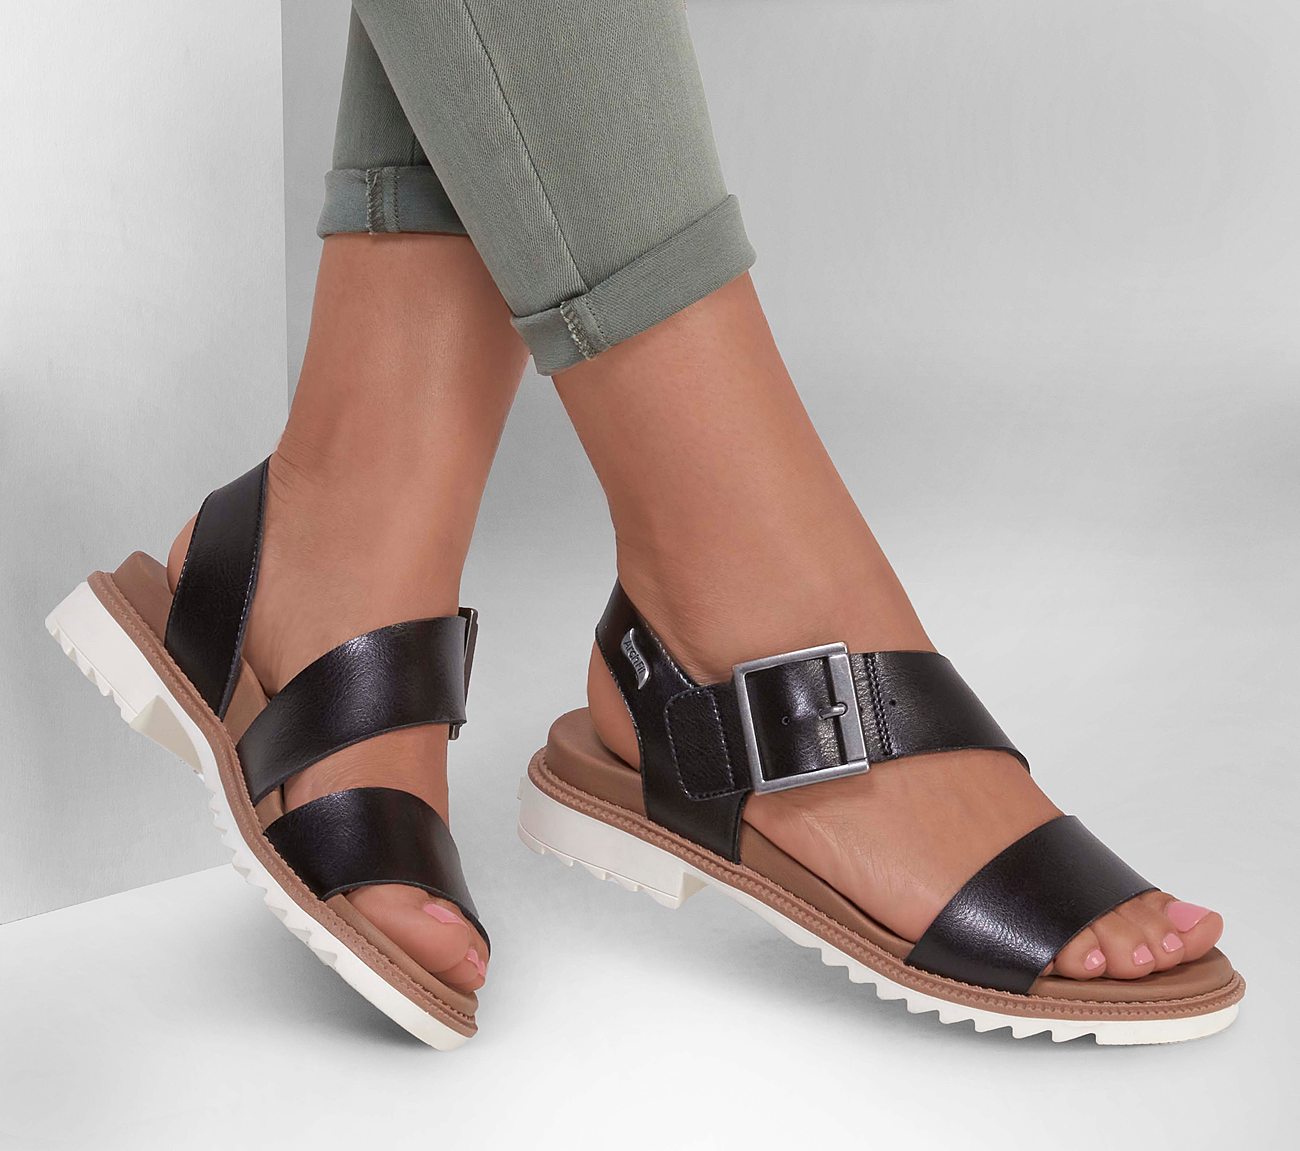 Arch Fit Lucy Sandal Skechers